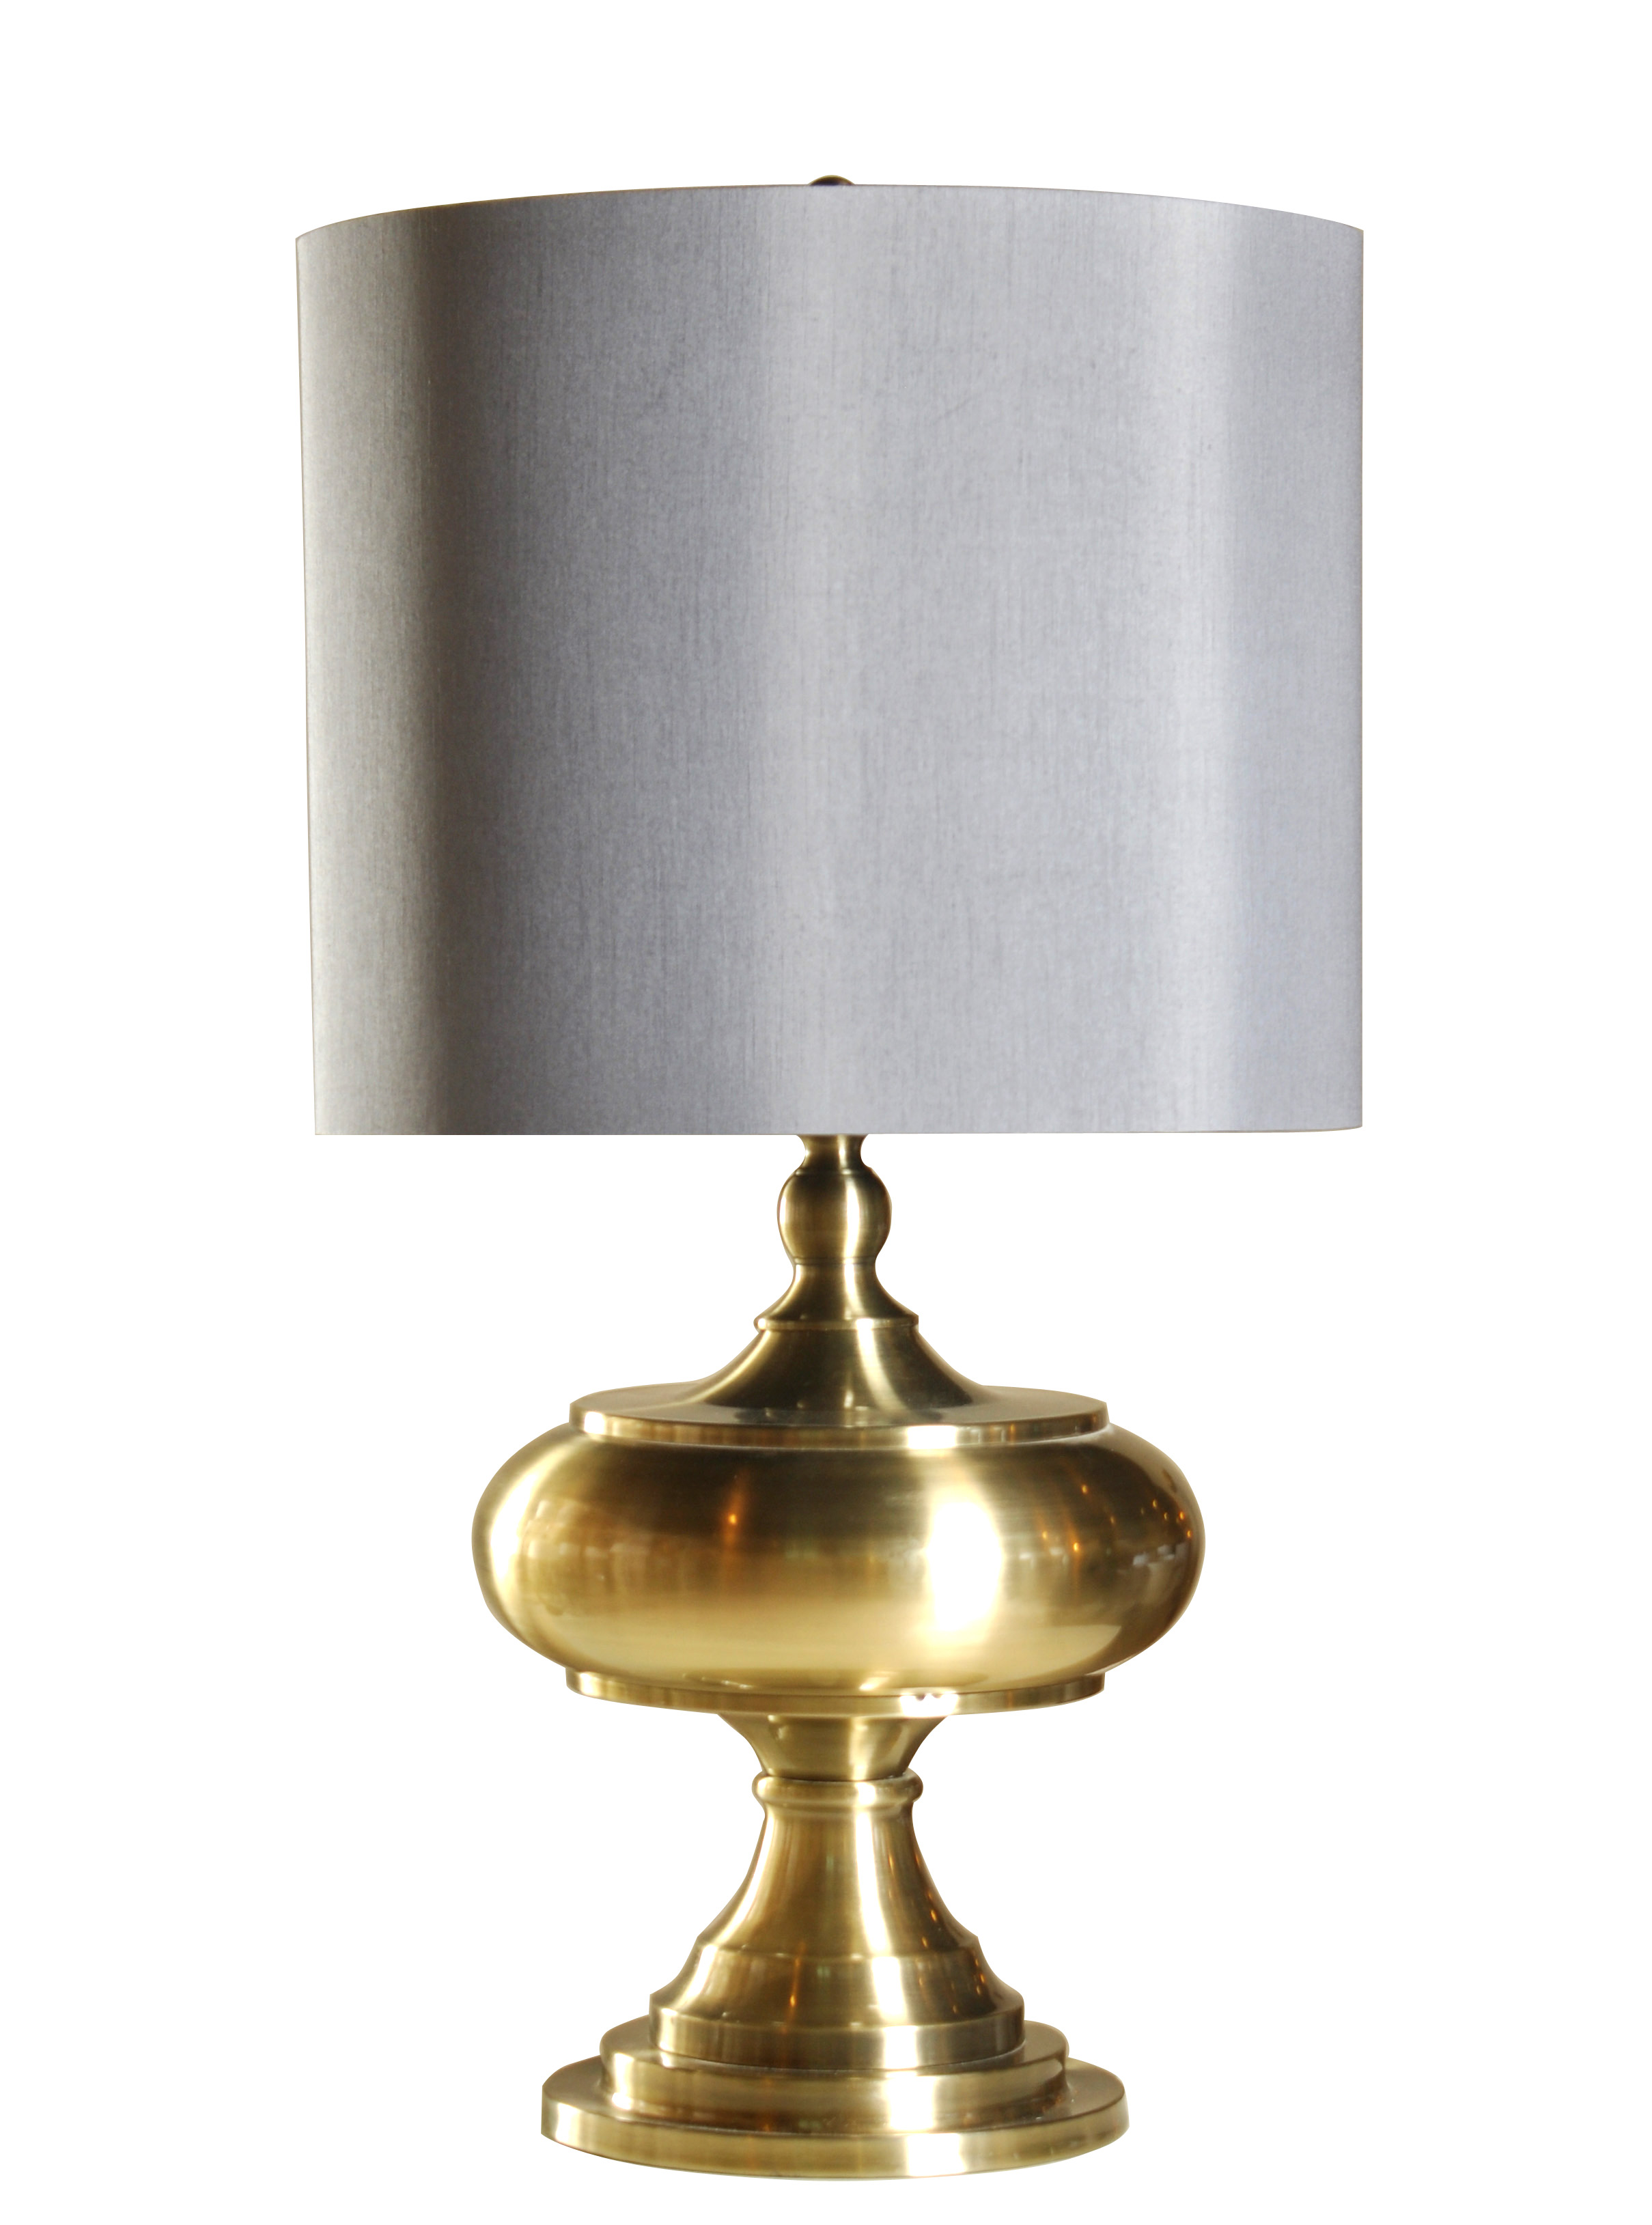 lamp with brass finish